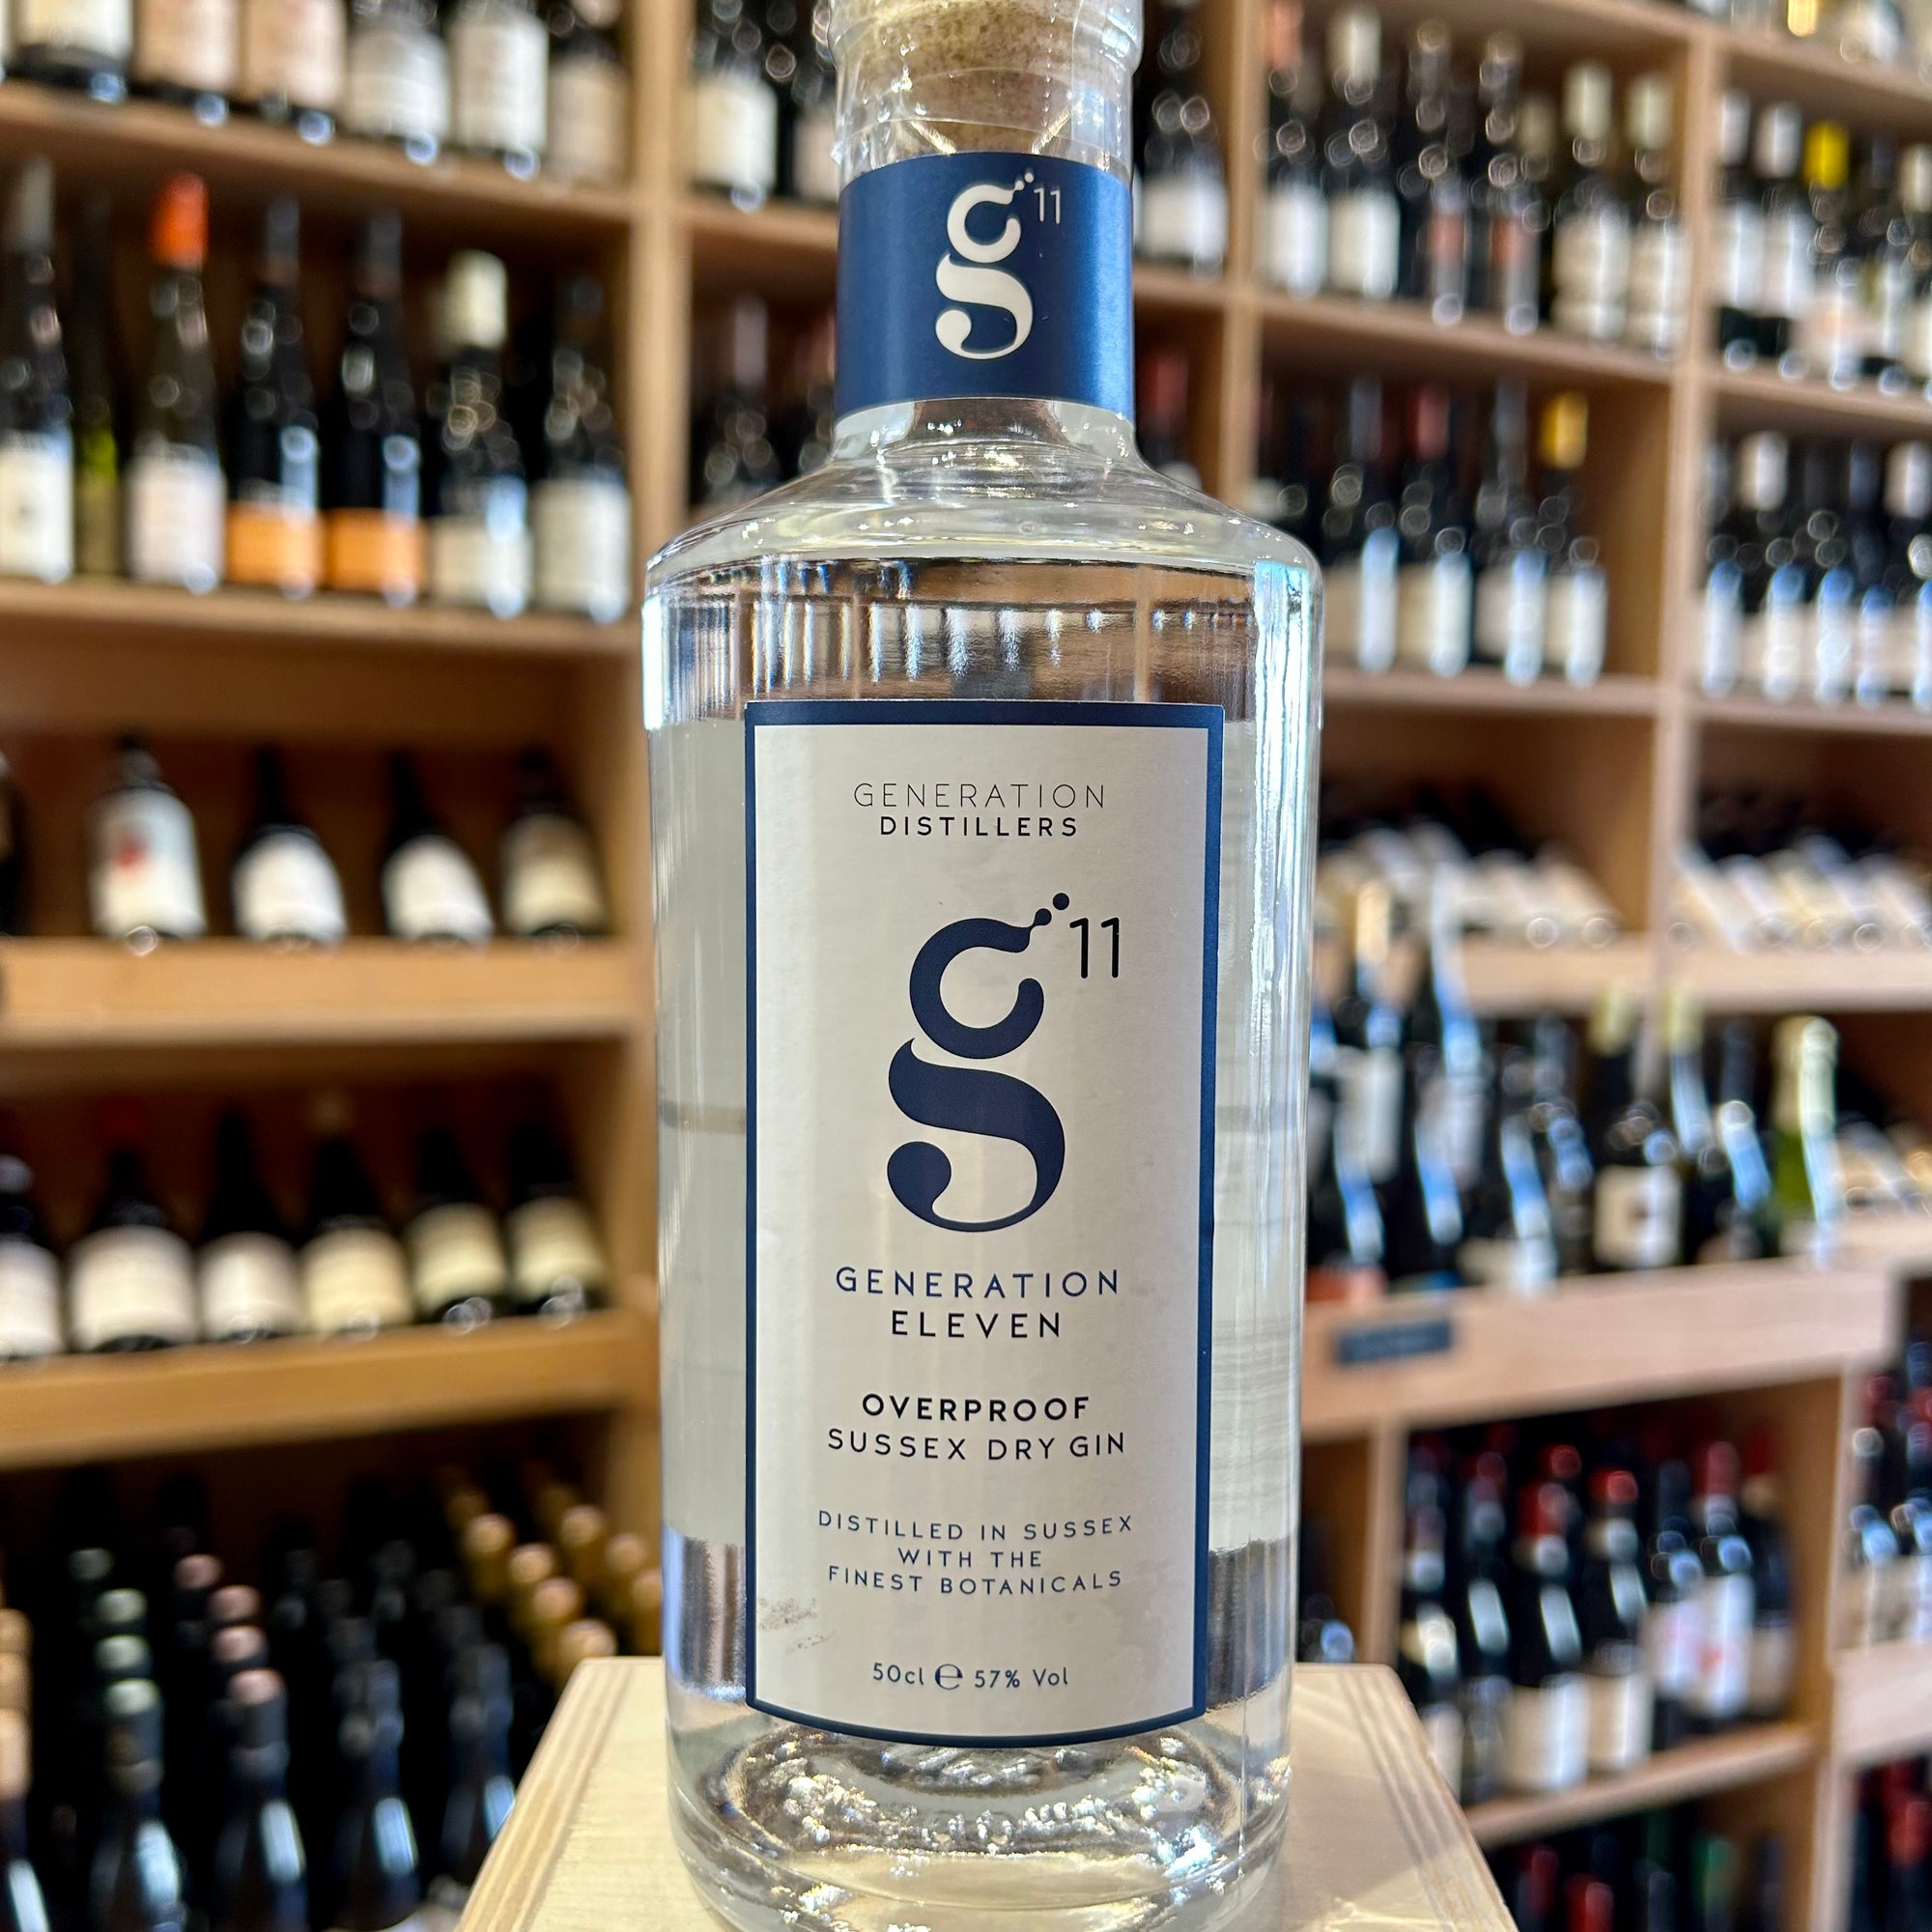 Generation 11 Overproof Sussex Dry Gin 50cl 57% Abv - Butler's Wine Cellar Brighton